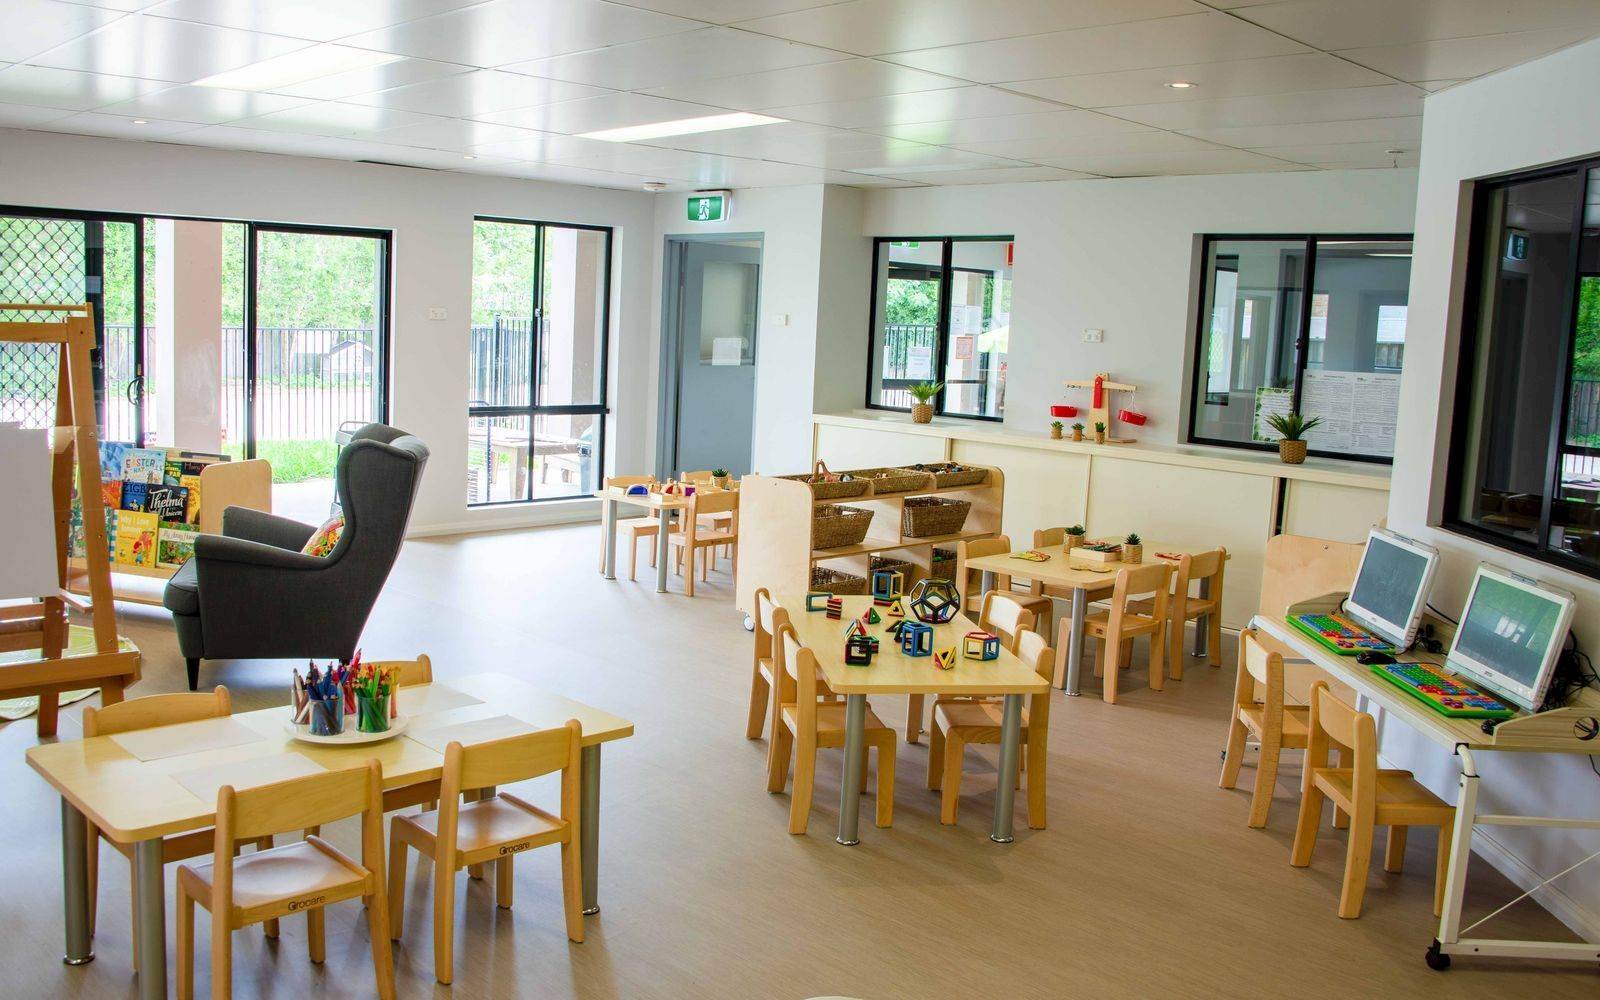 Young Academics Early Learning Centre - Kellyville, Redden Drive